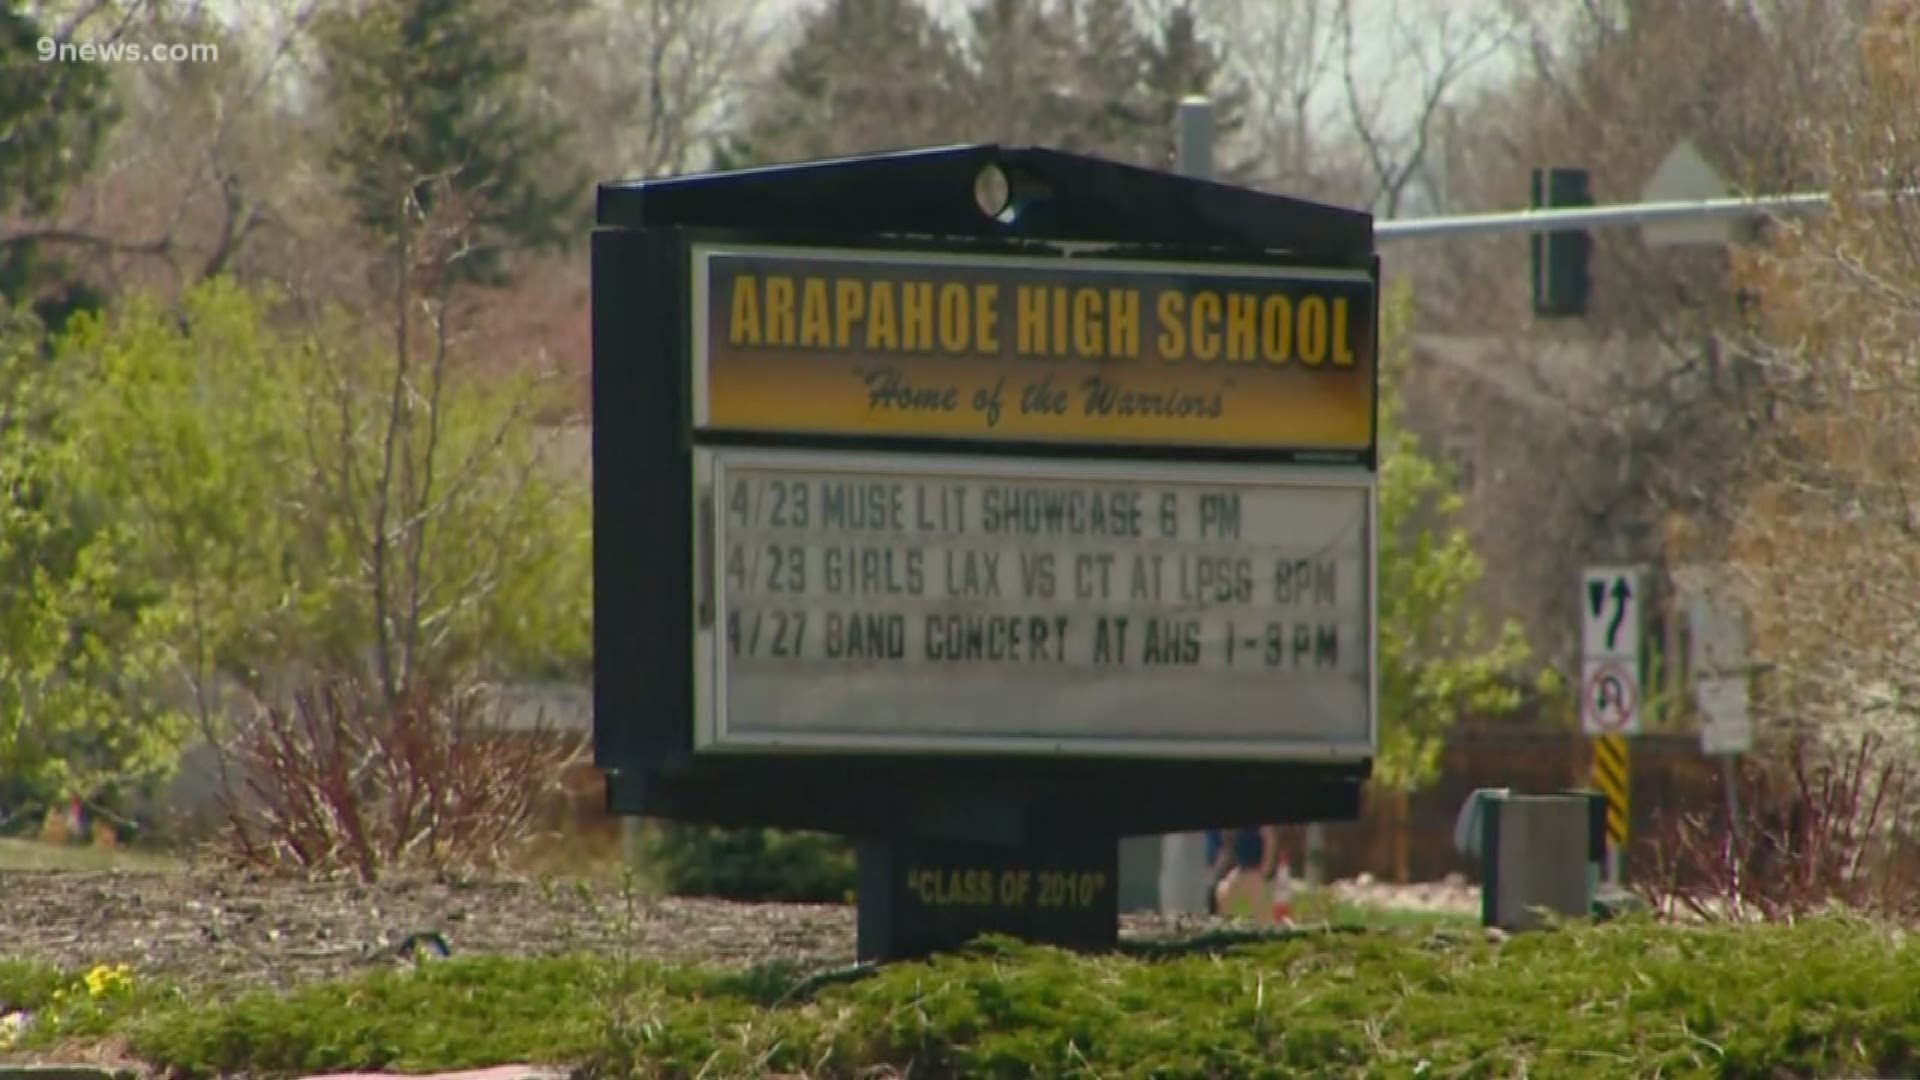 We've reported on students taking their lives far too often in the Arapahoe school community.